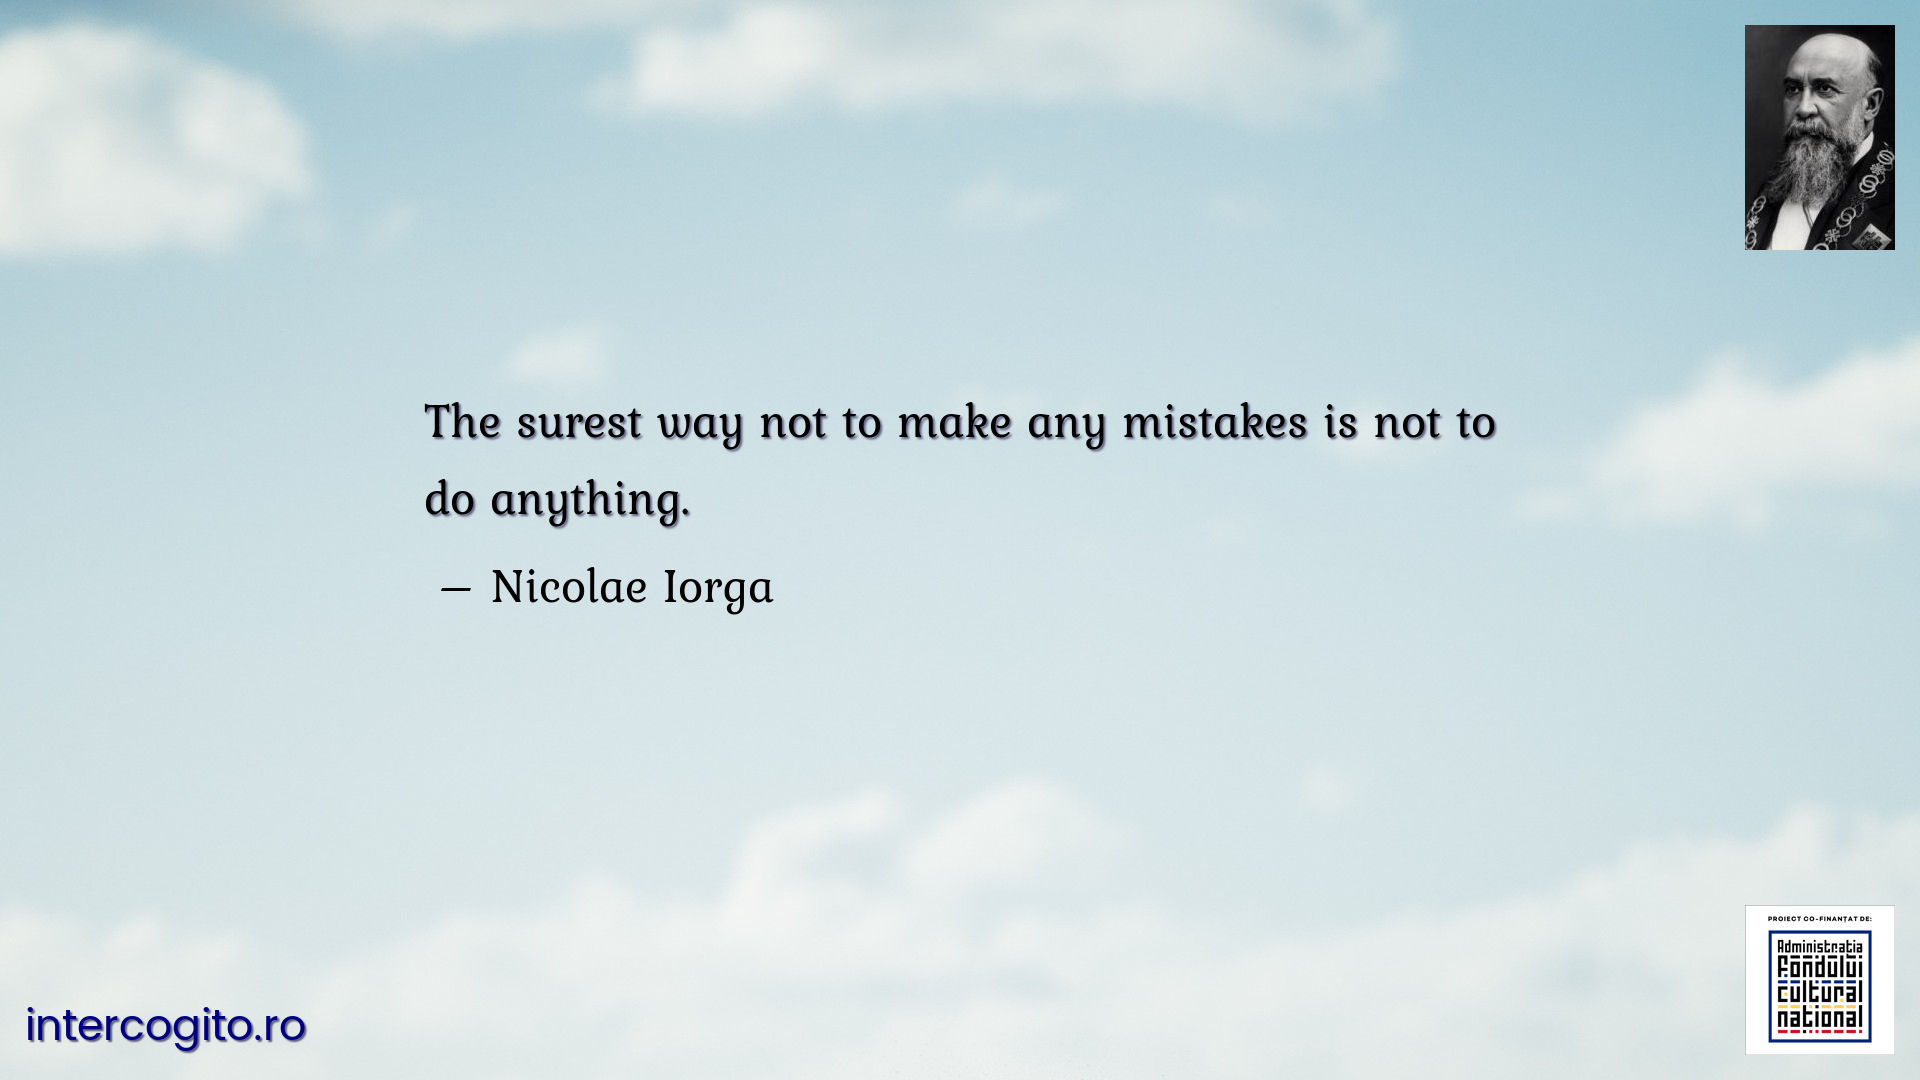 The surest way not to make any mistakes is not to do anything.